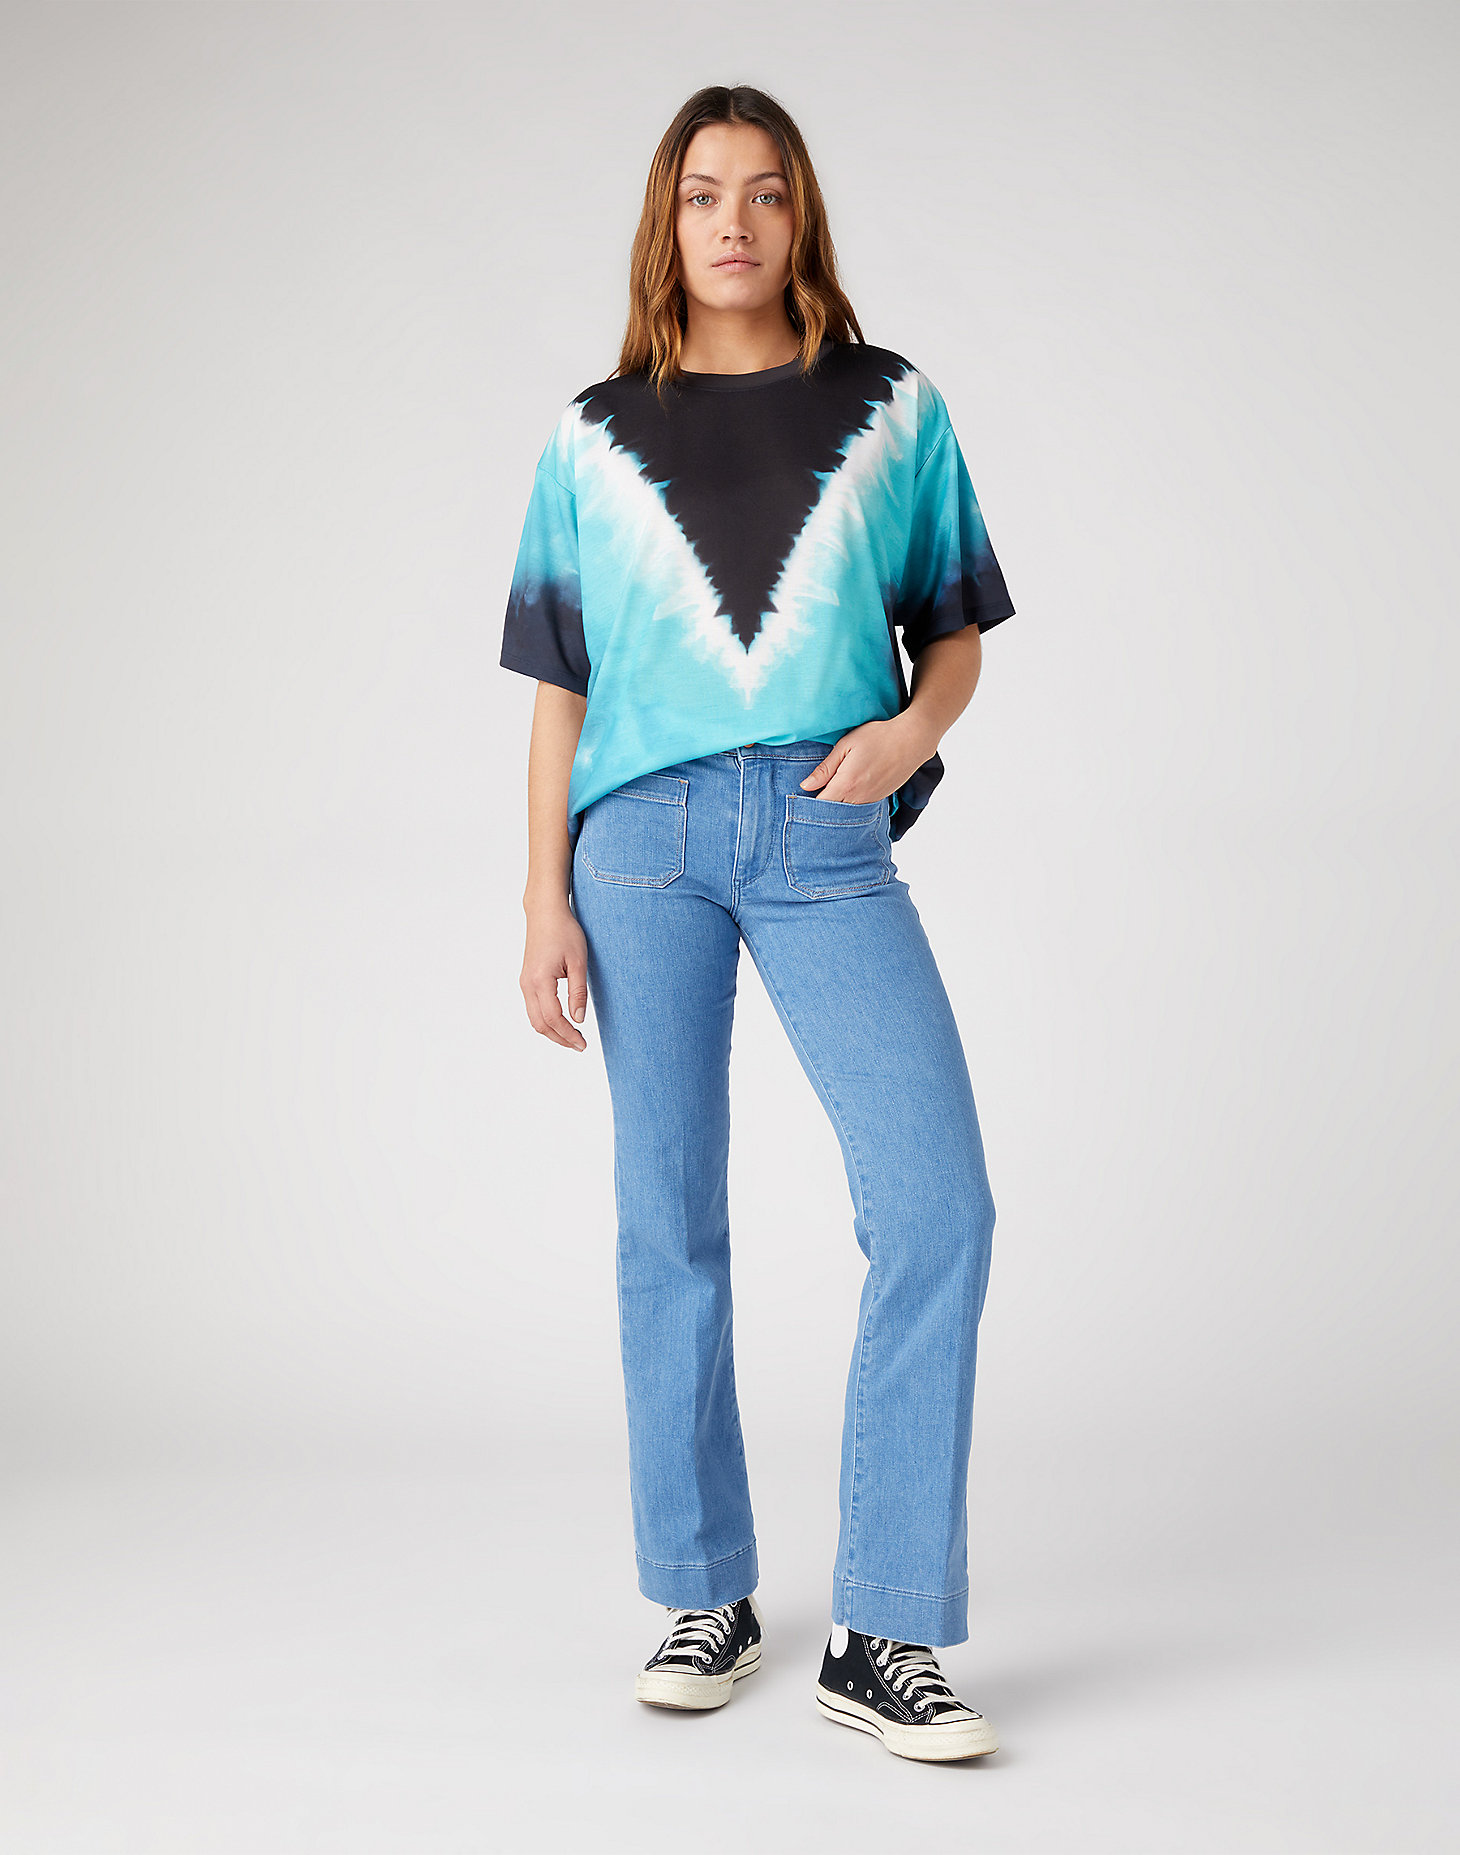 Flare Jeans in Eye Candy alternative view 1